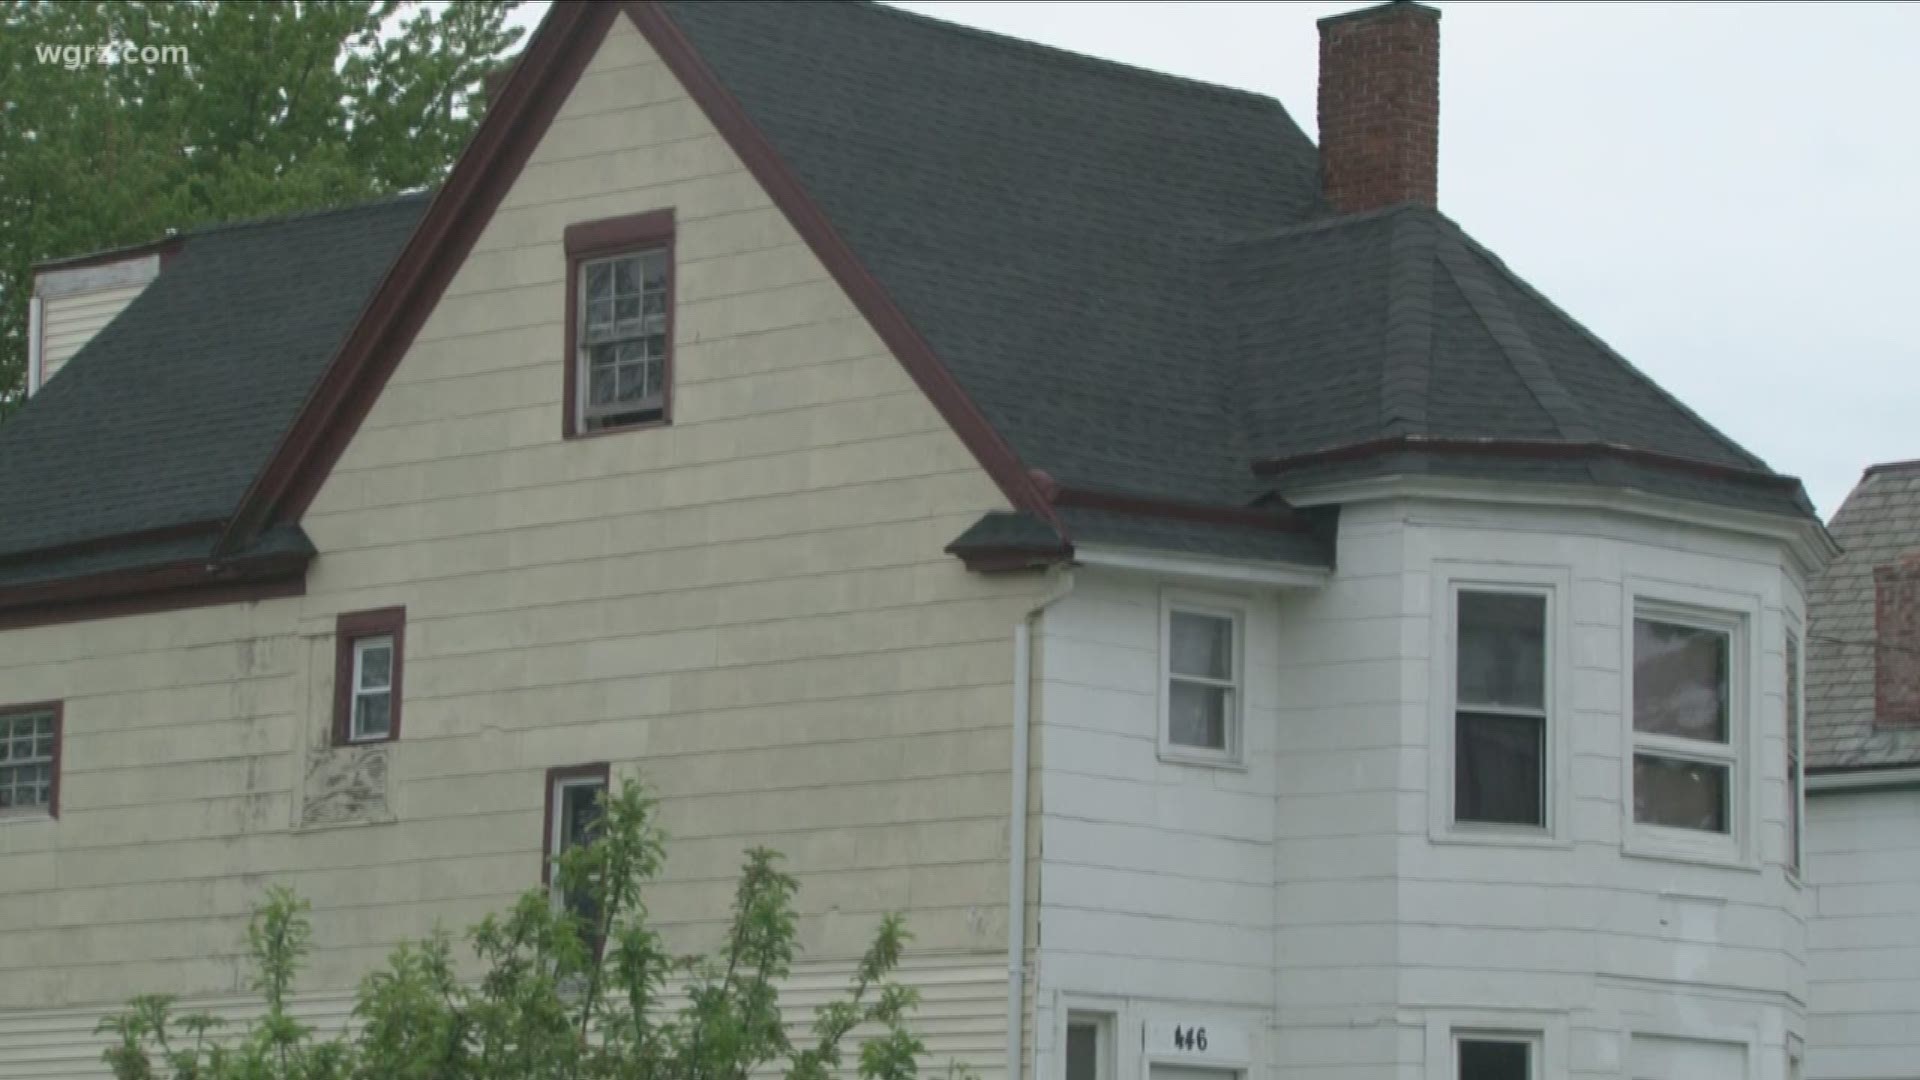 affordable housing isn't the only problem. In Buffalo quality housing can also be a challenge.">